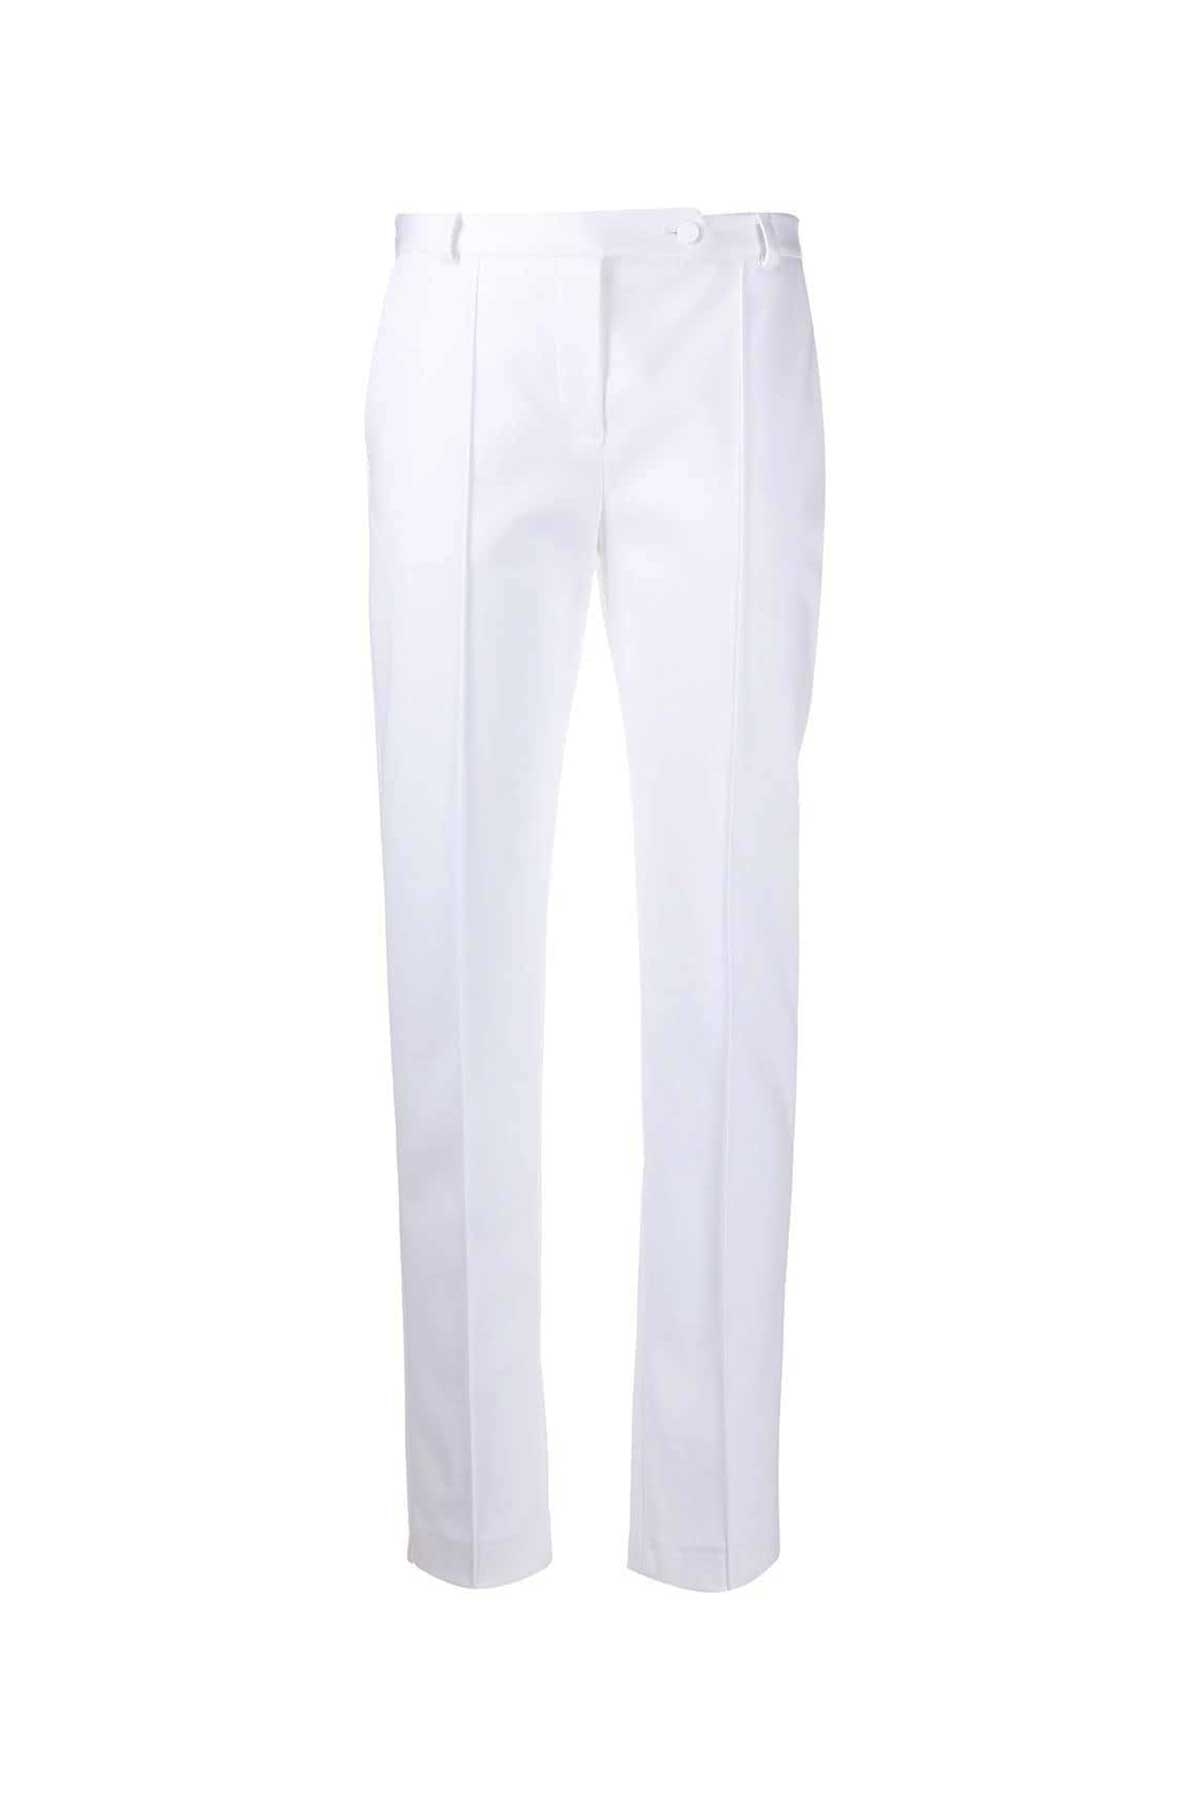 ORGANIC COTTON WHITE TAILORED TROUSERS - STYLAND